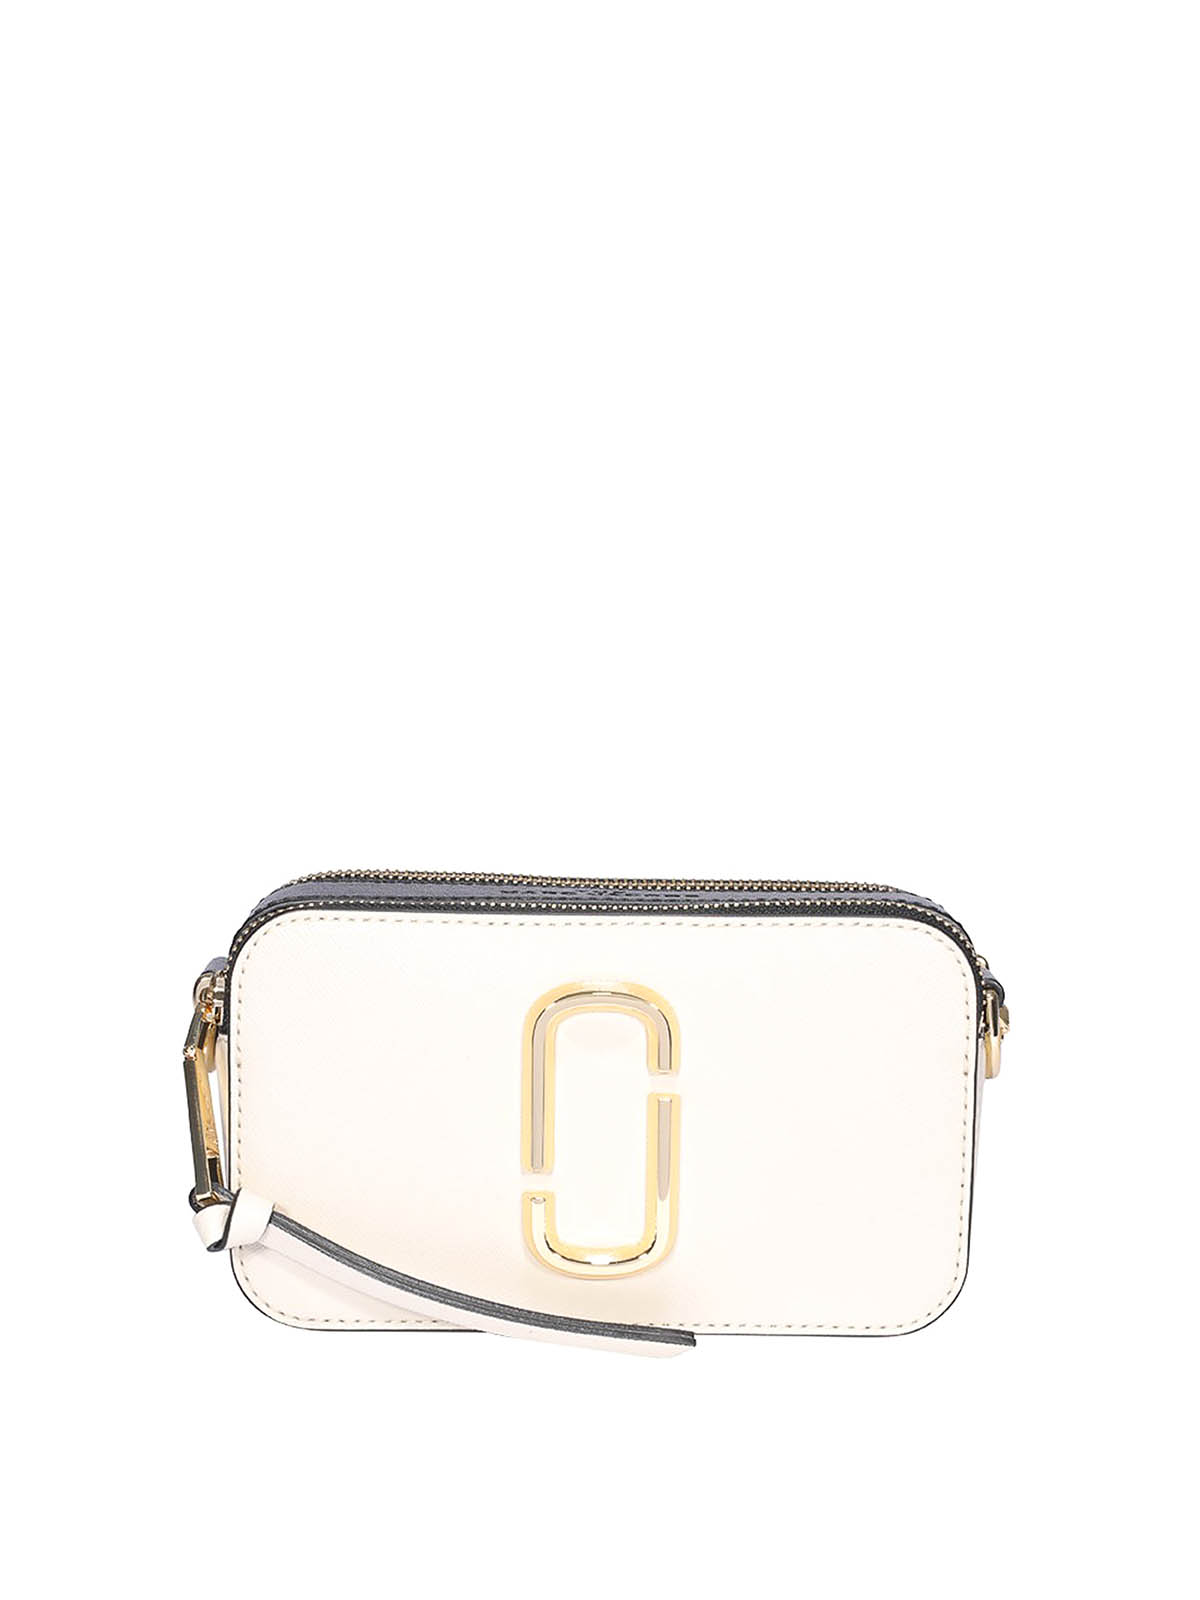 Marc Jacobs Small Snapshot Camera Bag - Authentic - New Cloud White Multi